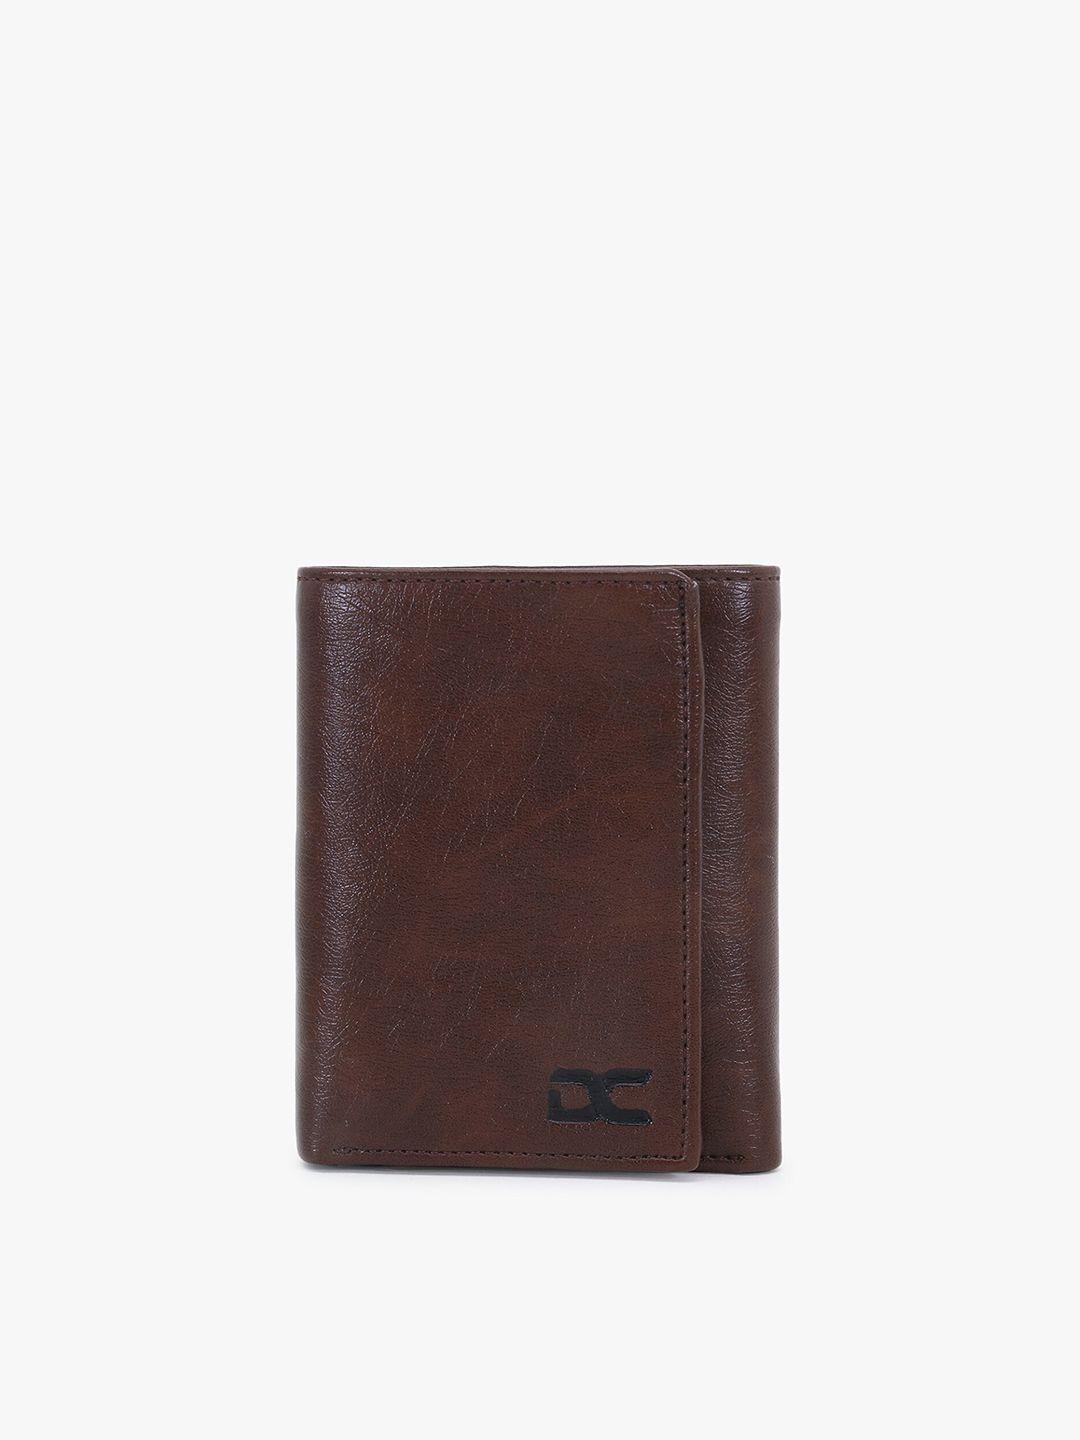 dezire crafts men brown pu leather three fold wallet